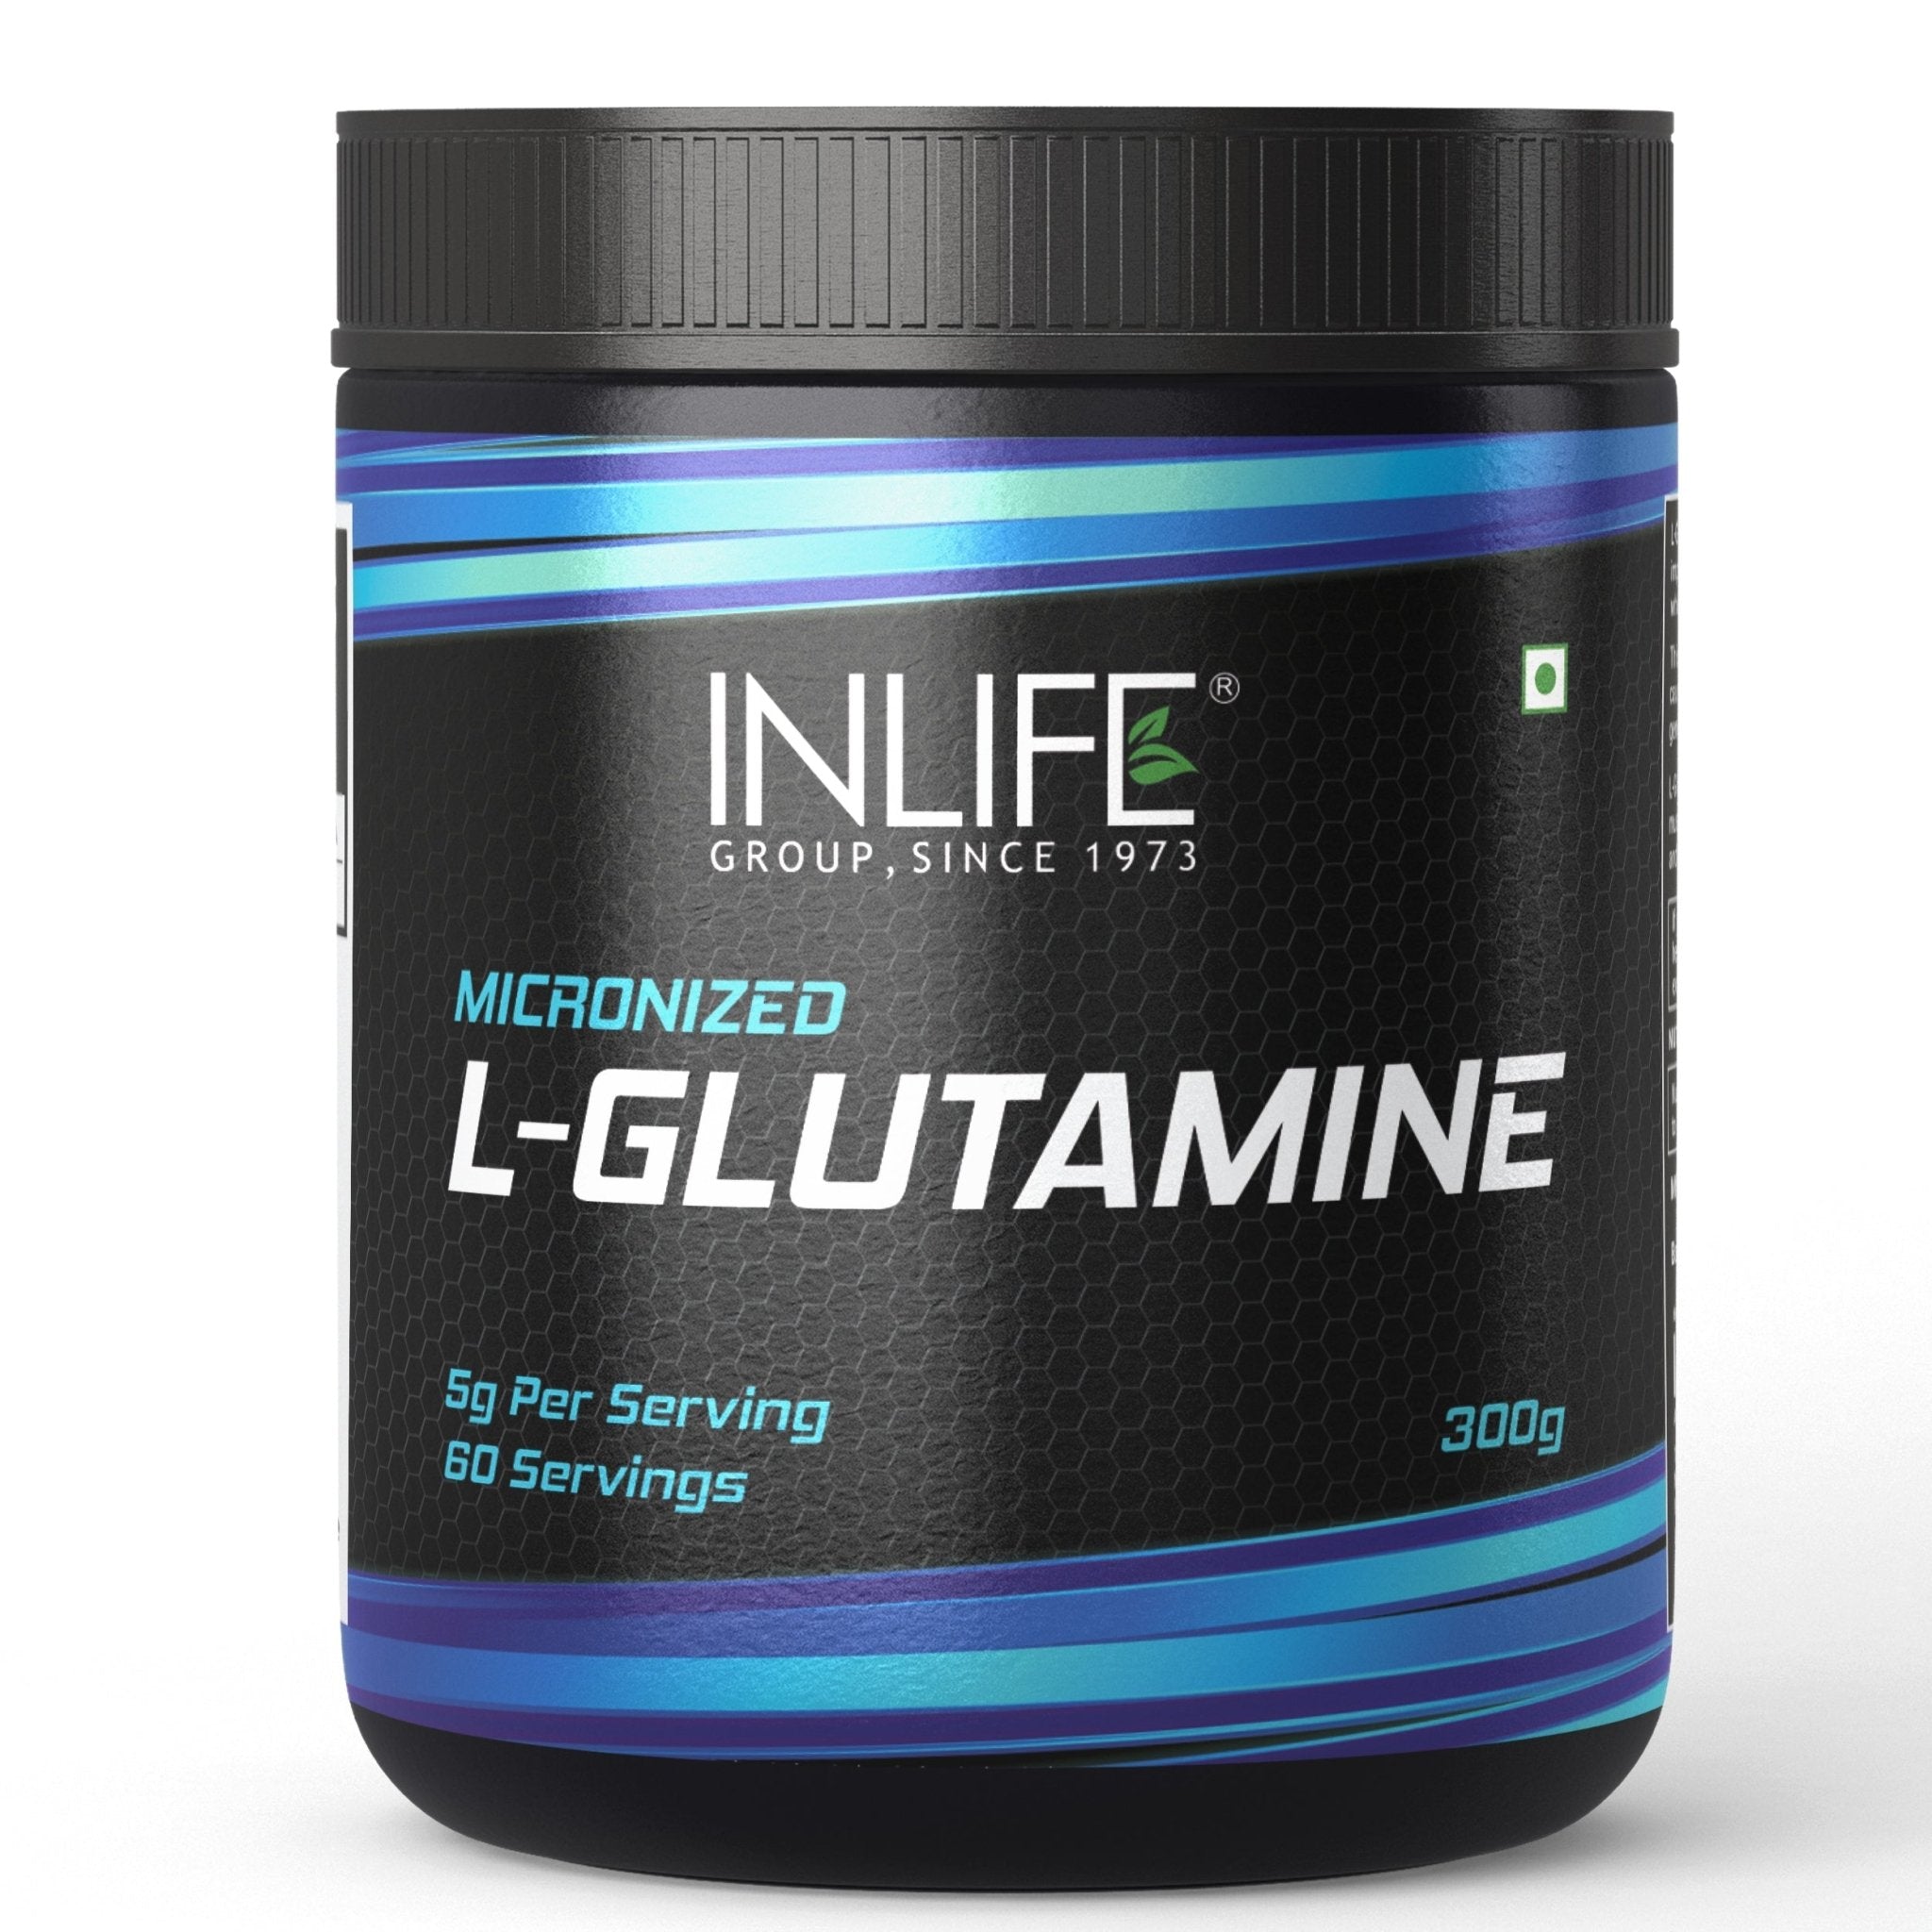 INLIFE Micronized L-Glutamine Powder Supplement - 300 Grams - Inlife Pharma Private Limited